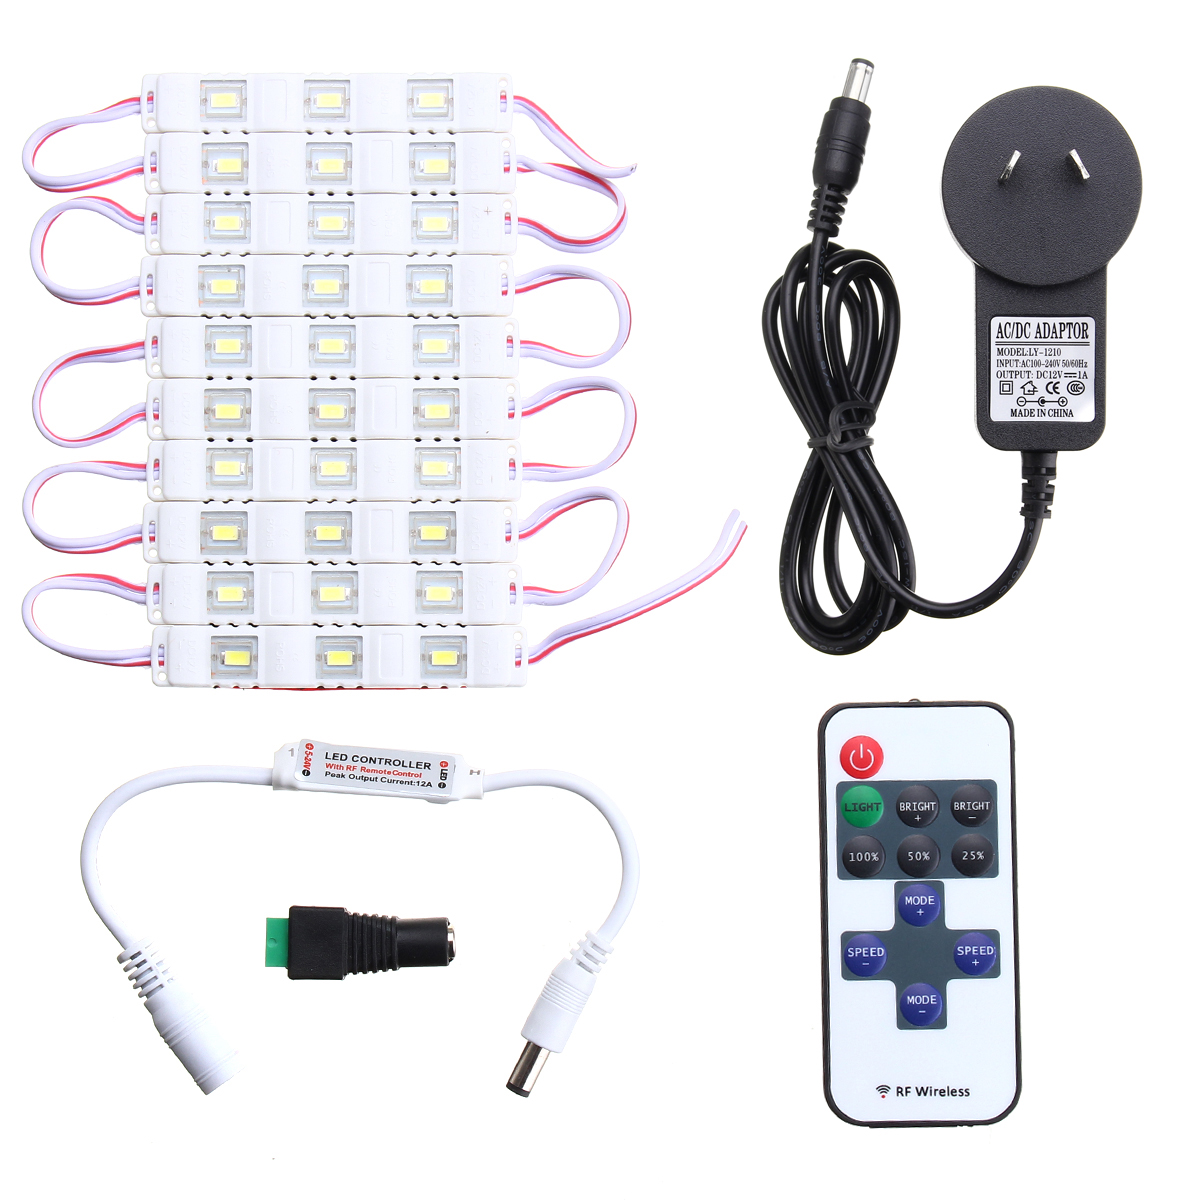 Waterproof-15M-SMD5630-LED-White-Cosmetic-Mirror-Module-Strip-Light-Remote-Control-1148298-2